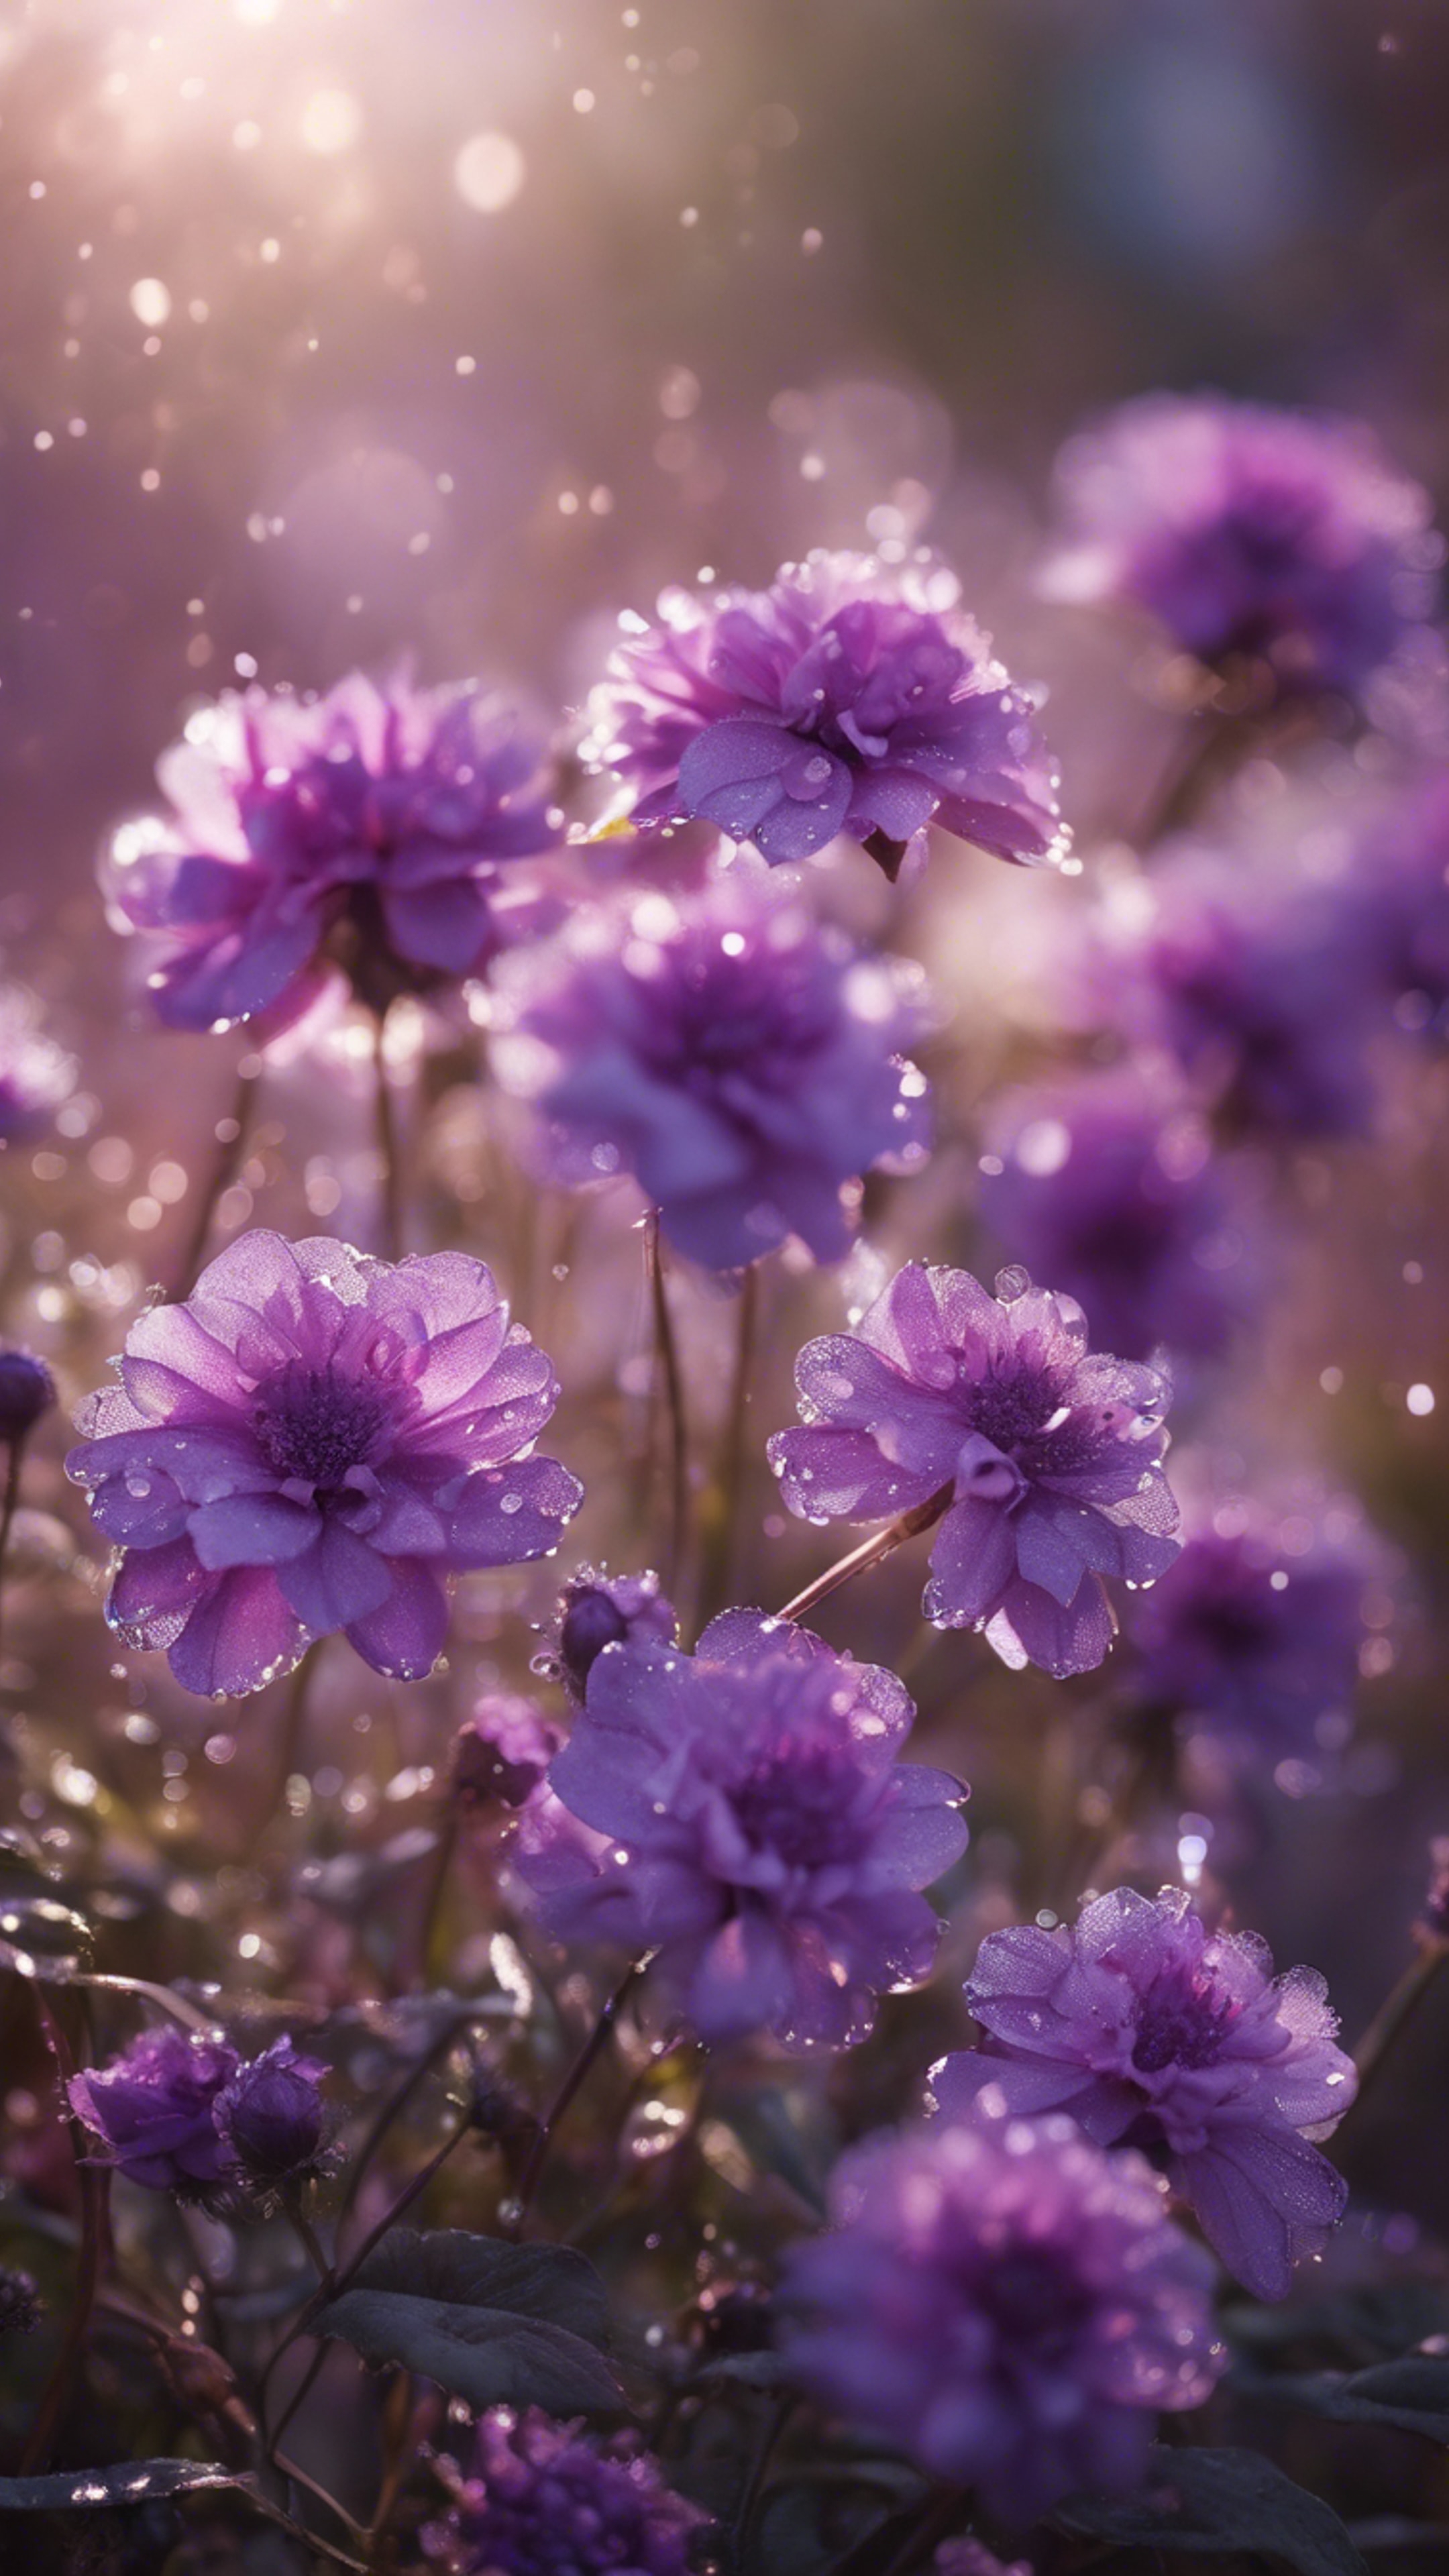 An impressive collage of purple flowers in full bloom, highlighted by sparkling morning dew. Tapeta[23d1df20d4e341739cf3]